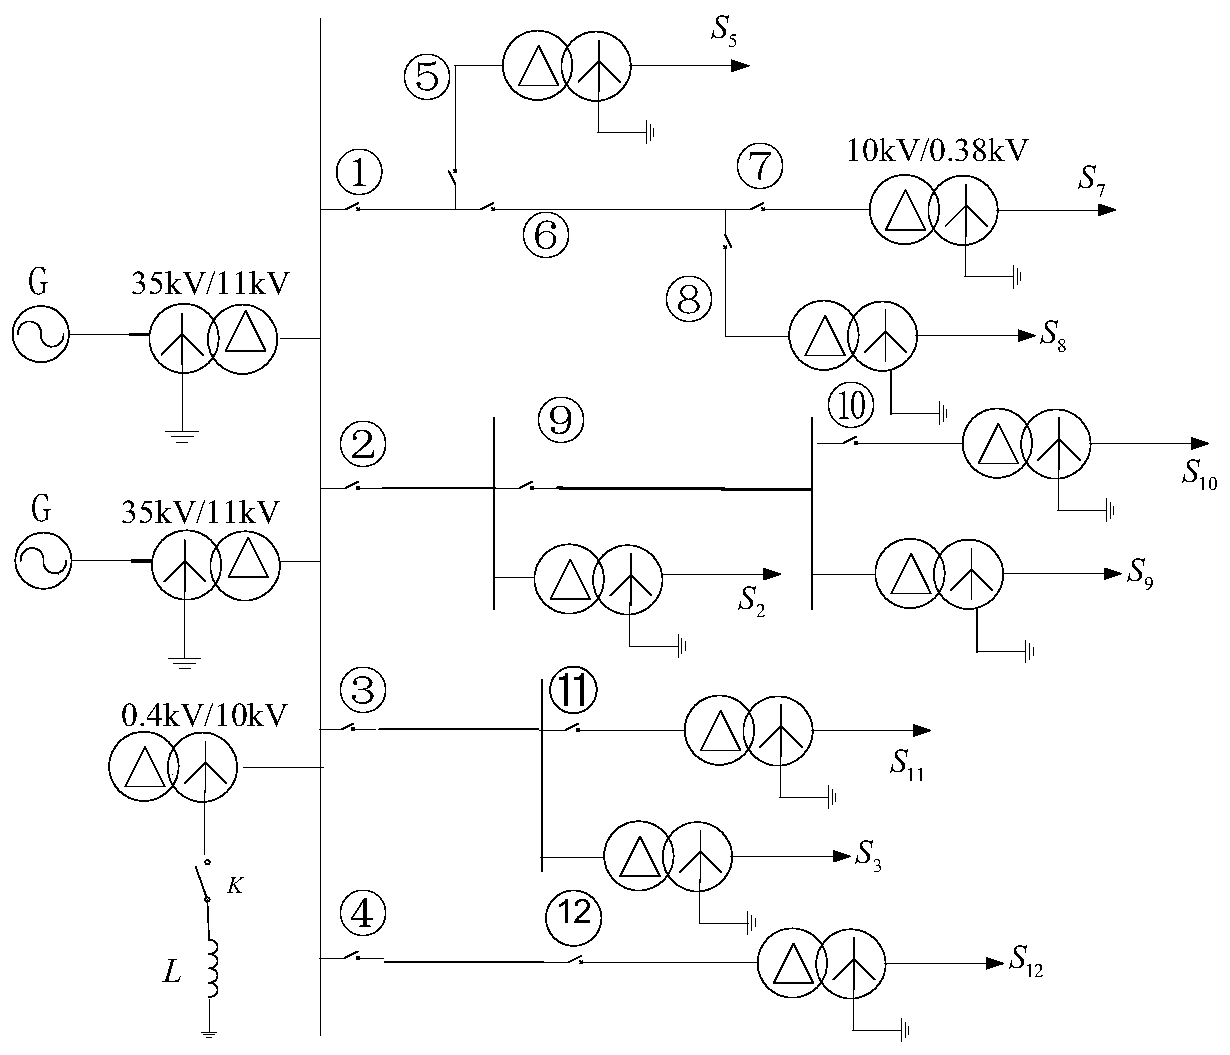 Ground fault location method for resonant grounded system based on phase current and phase comparison